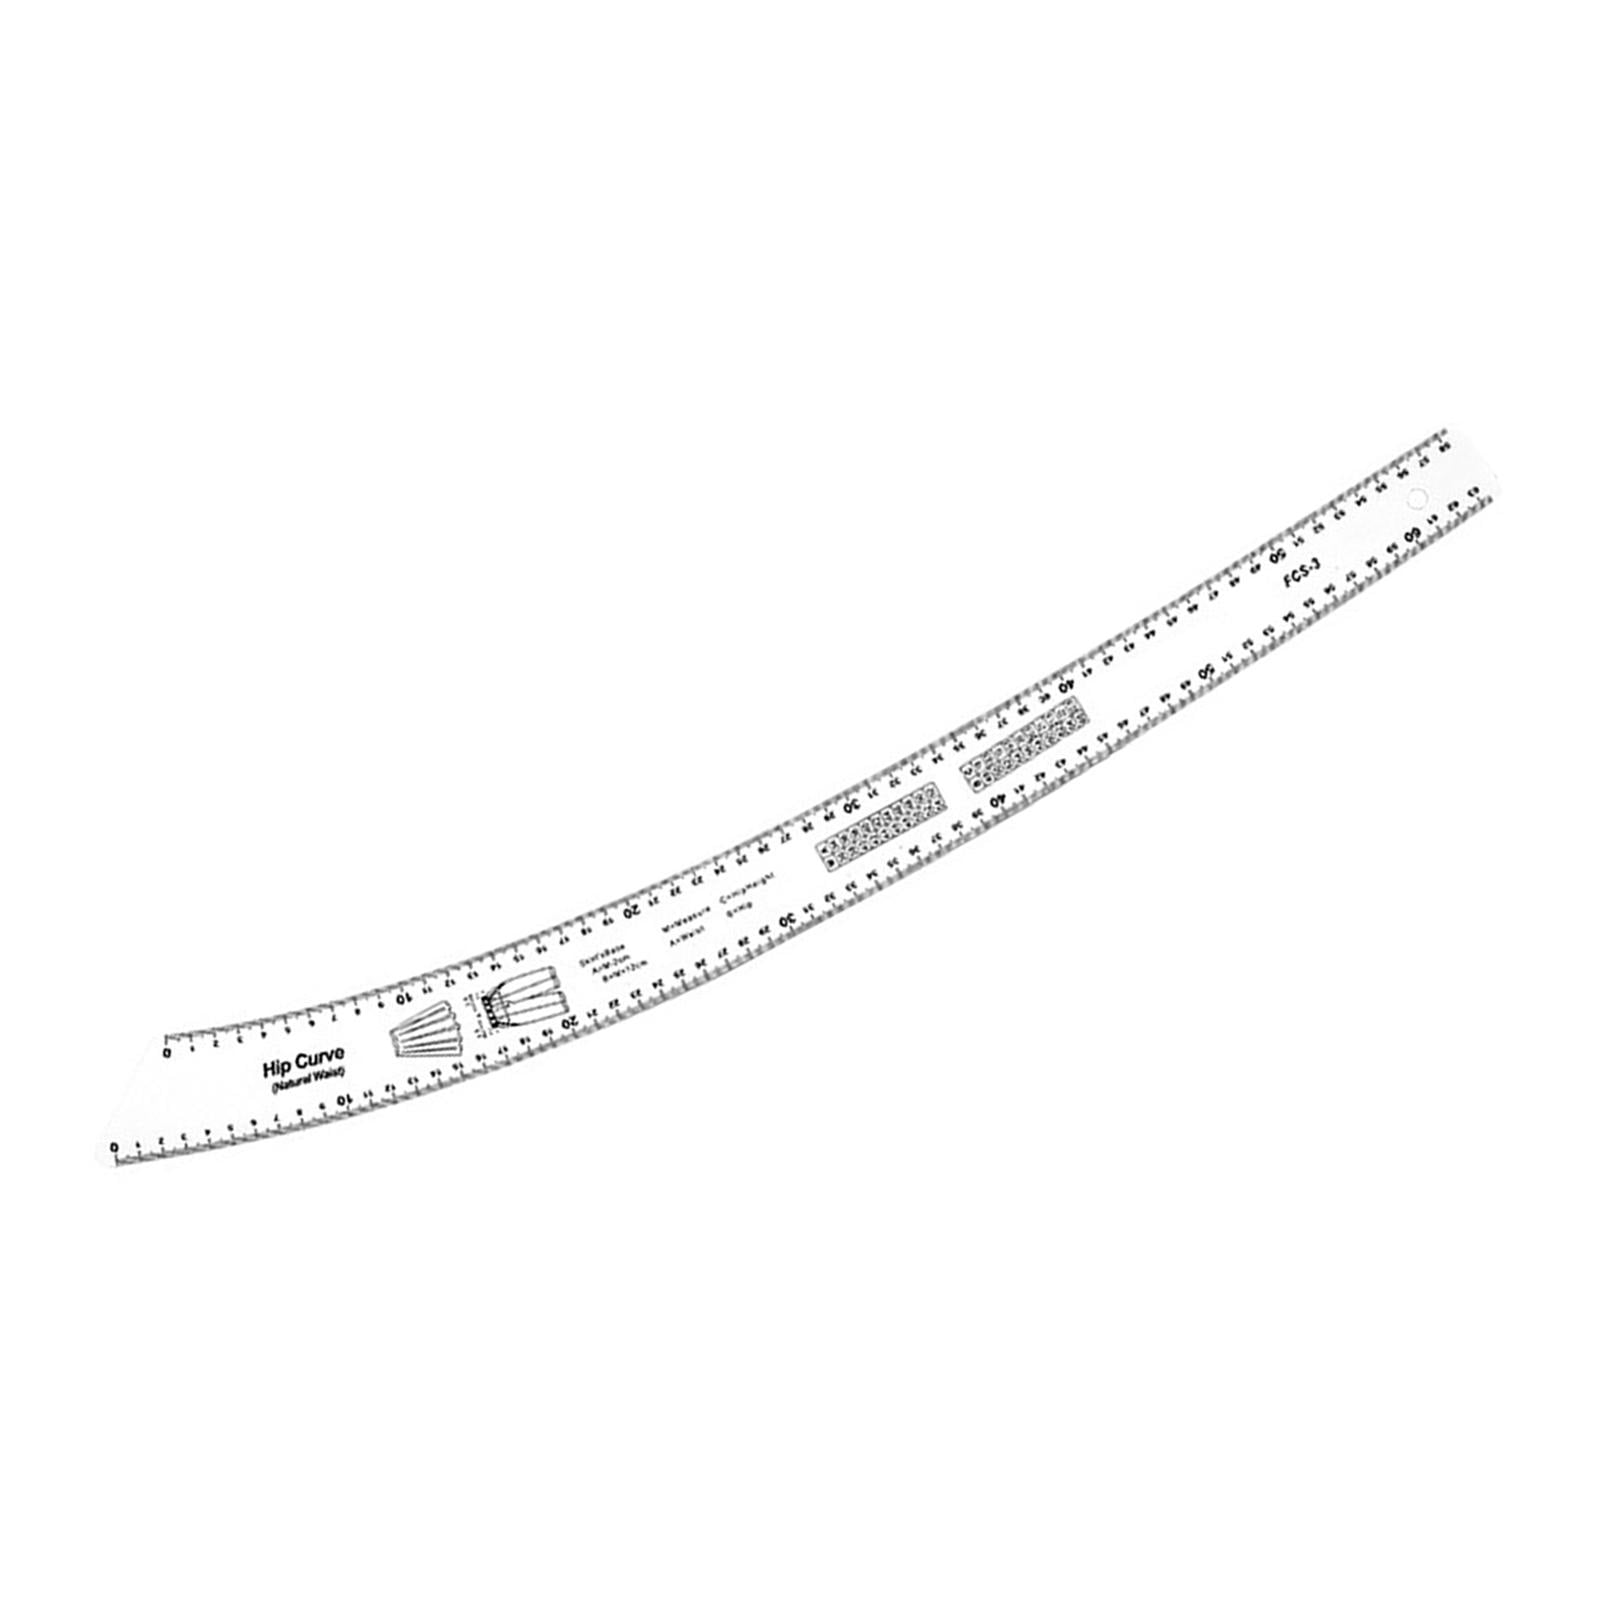 French Curve Ruler Tailor Tool Clothing Pattern Dress Curve Ruler Making Template Metric Fashion Design Tailoring Measure , Thin Waist Thin Waist Hip